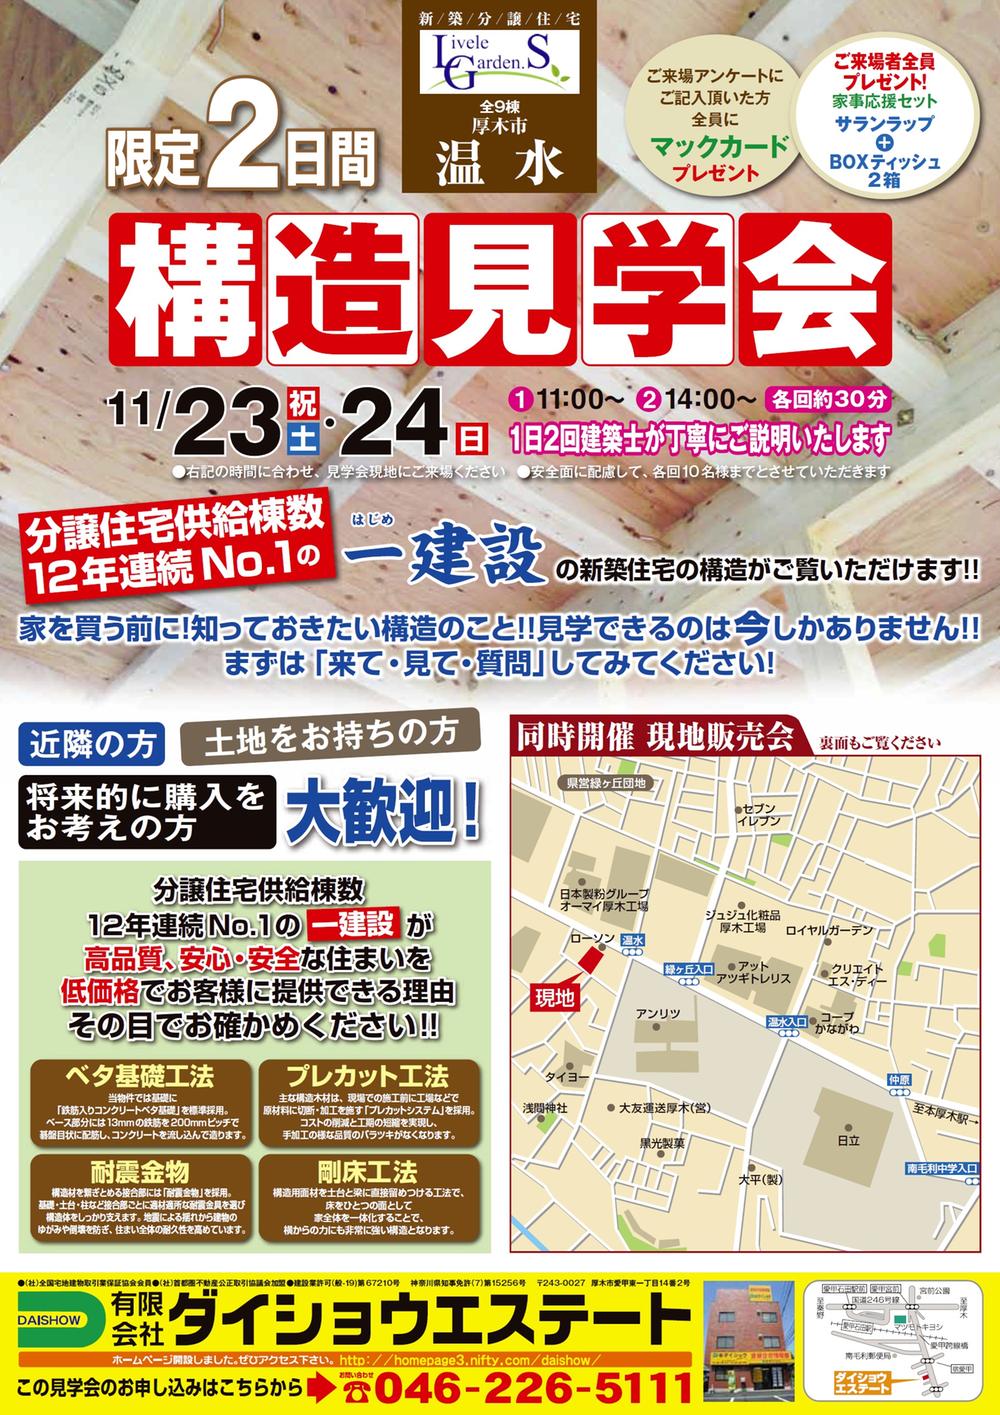 Local guide map. ~ Limit 2 days Structure tours held decision ~ (1)11:00 ~  (2)14:00 ~  Now the gift there can tour to everybody twice architect 30 minutes about one day each time is our carefully you will explain your visit! There is not only!